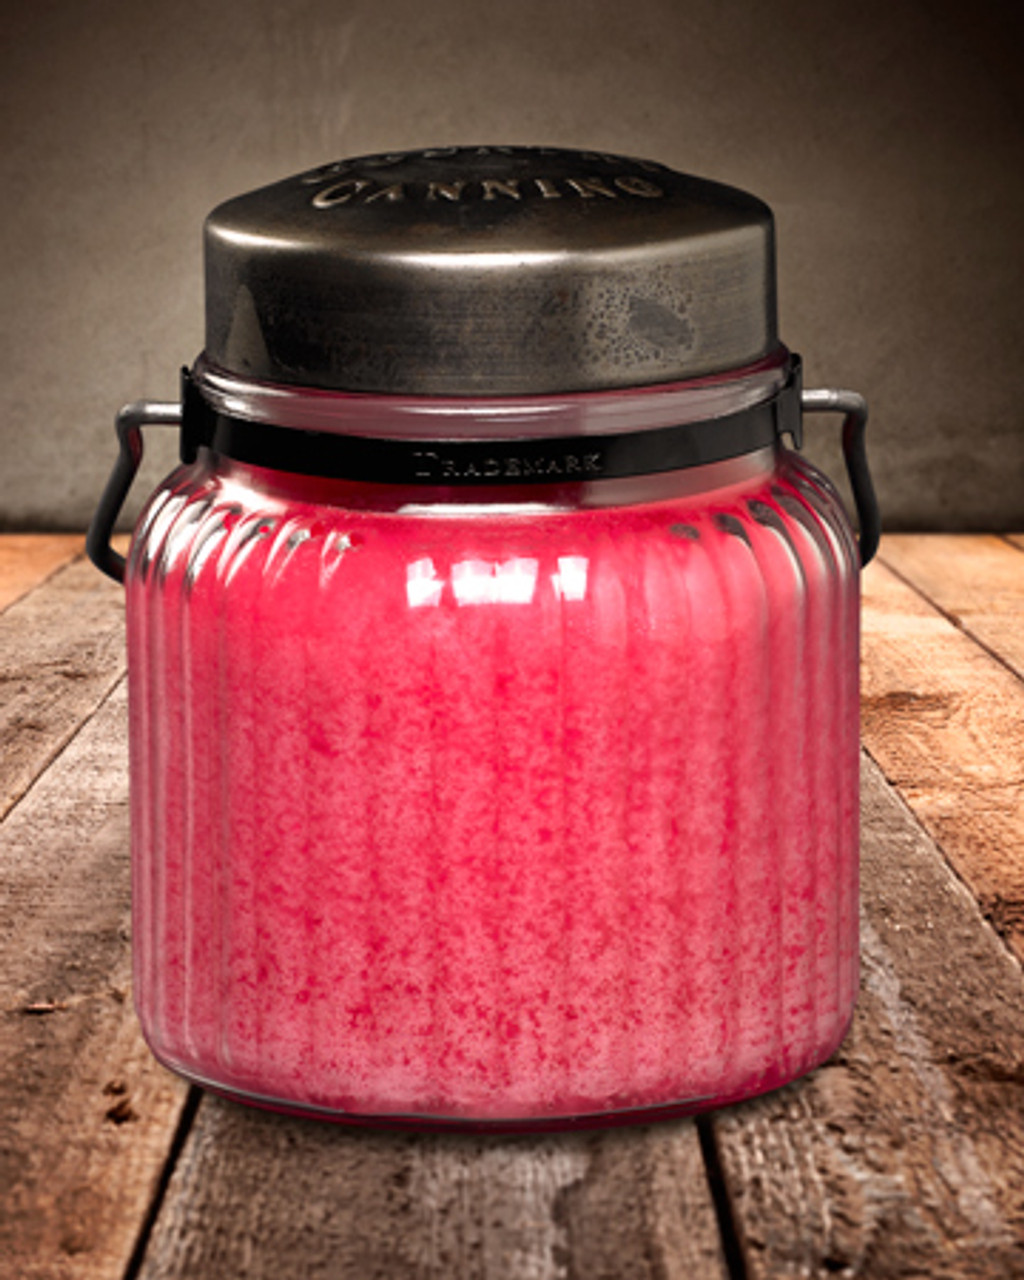 Cotton Candy 18 oz. McCall's Indulgence Jar Candle - Candles To My